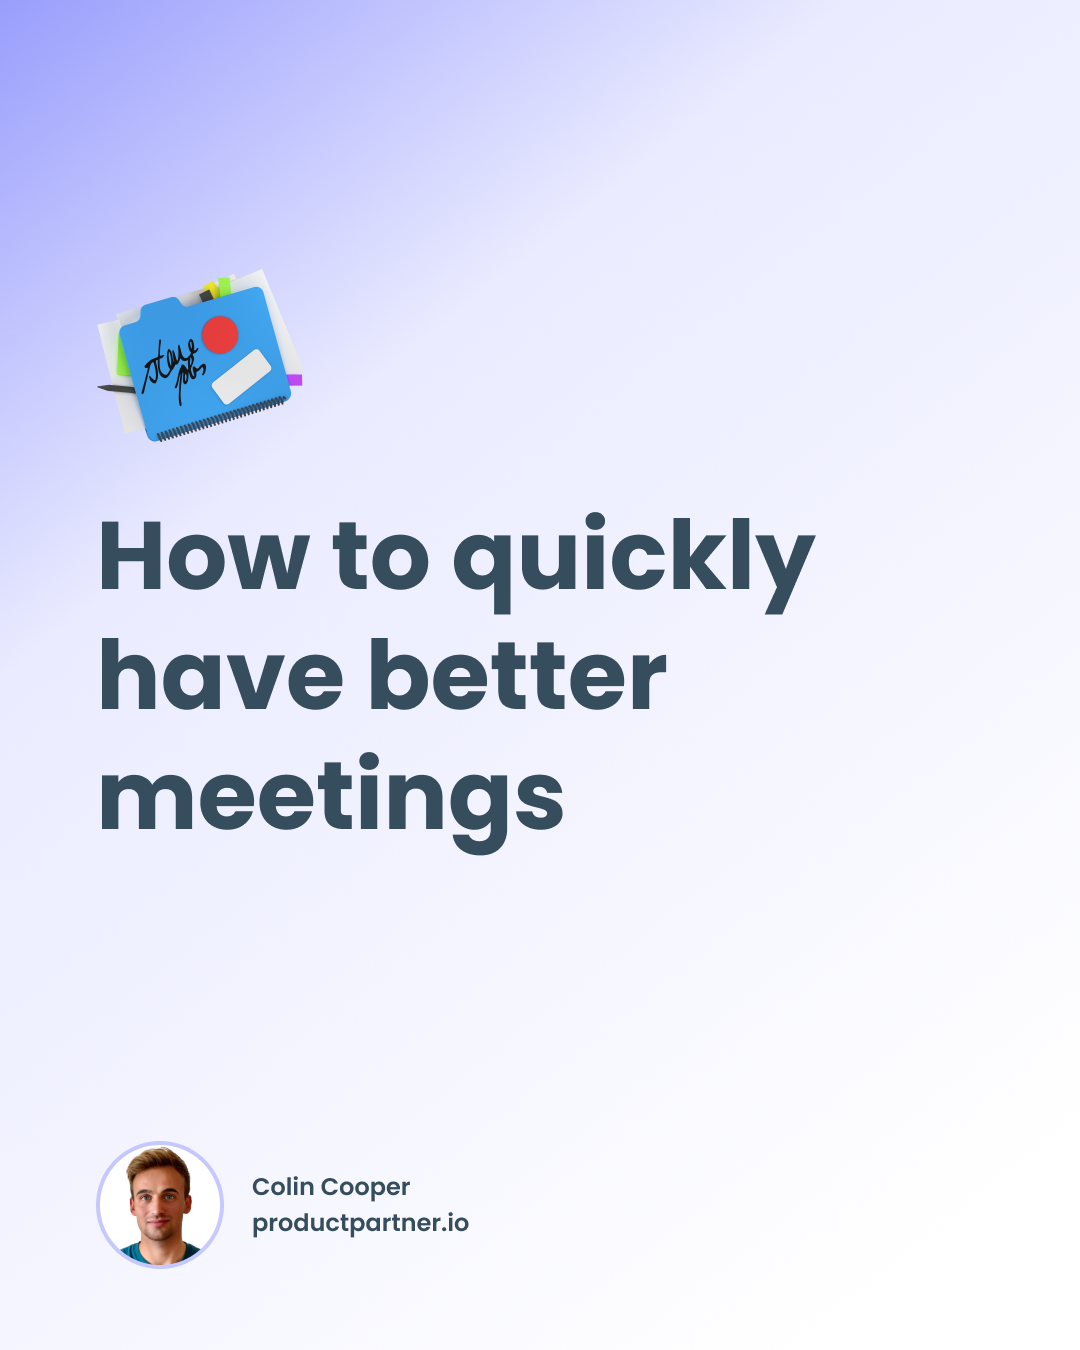 How to quickly have better meetings